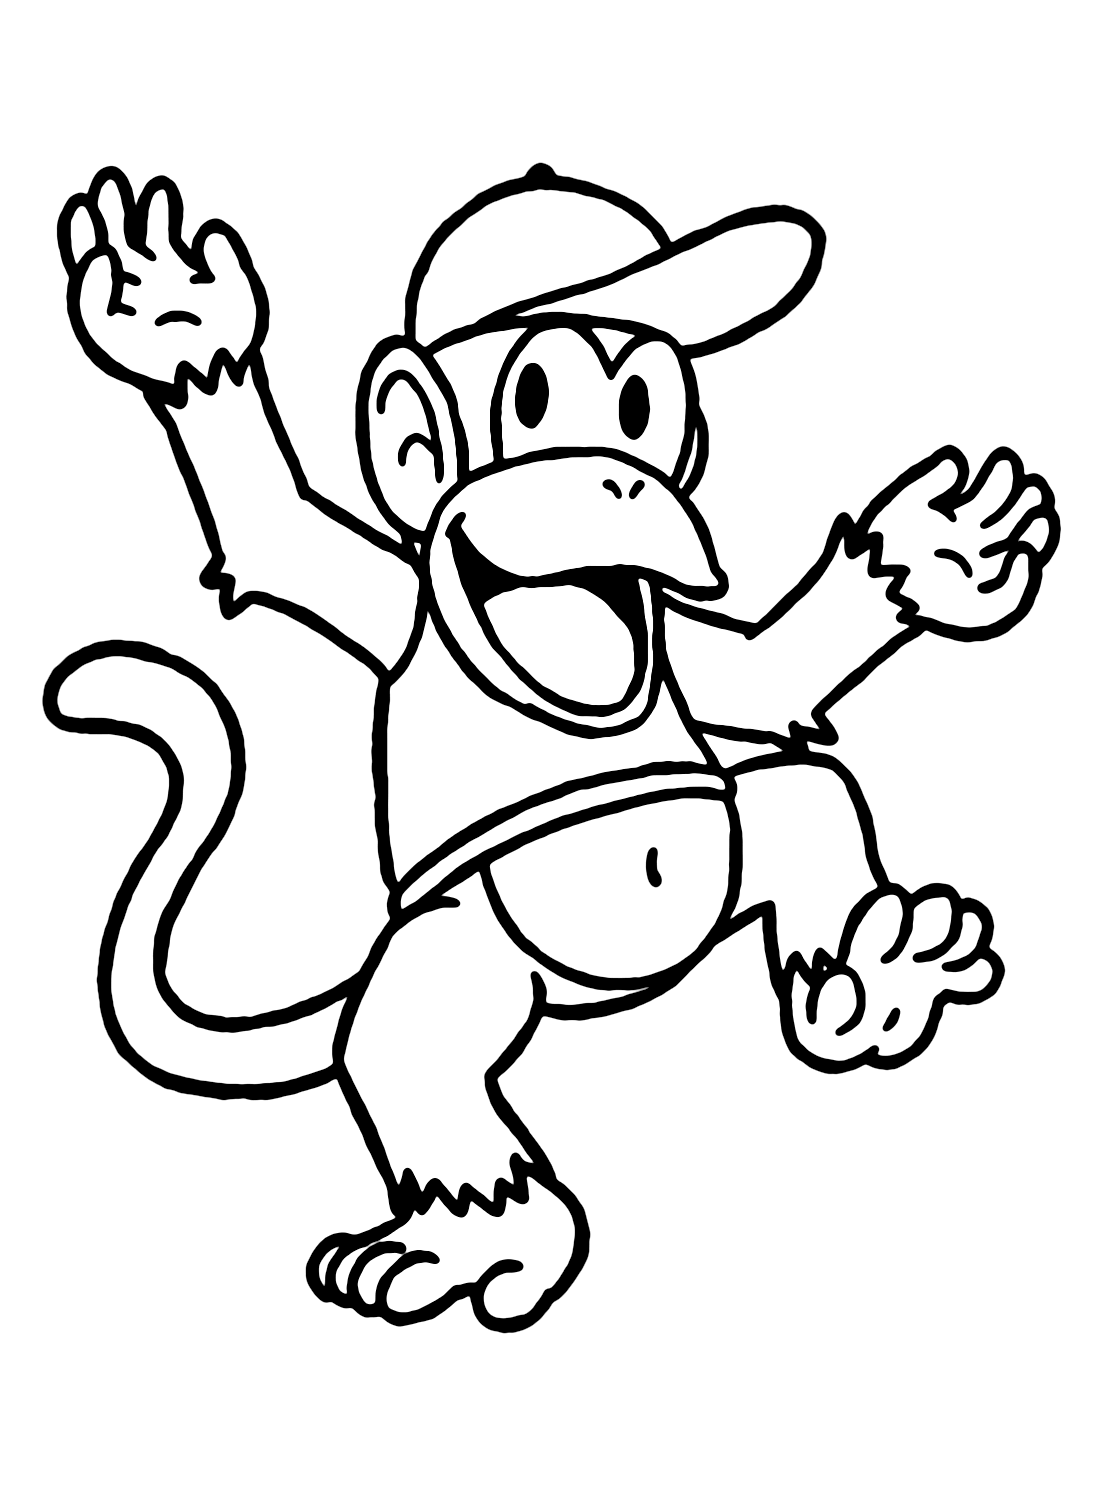 Diddy kong coloring pages printable for free download